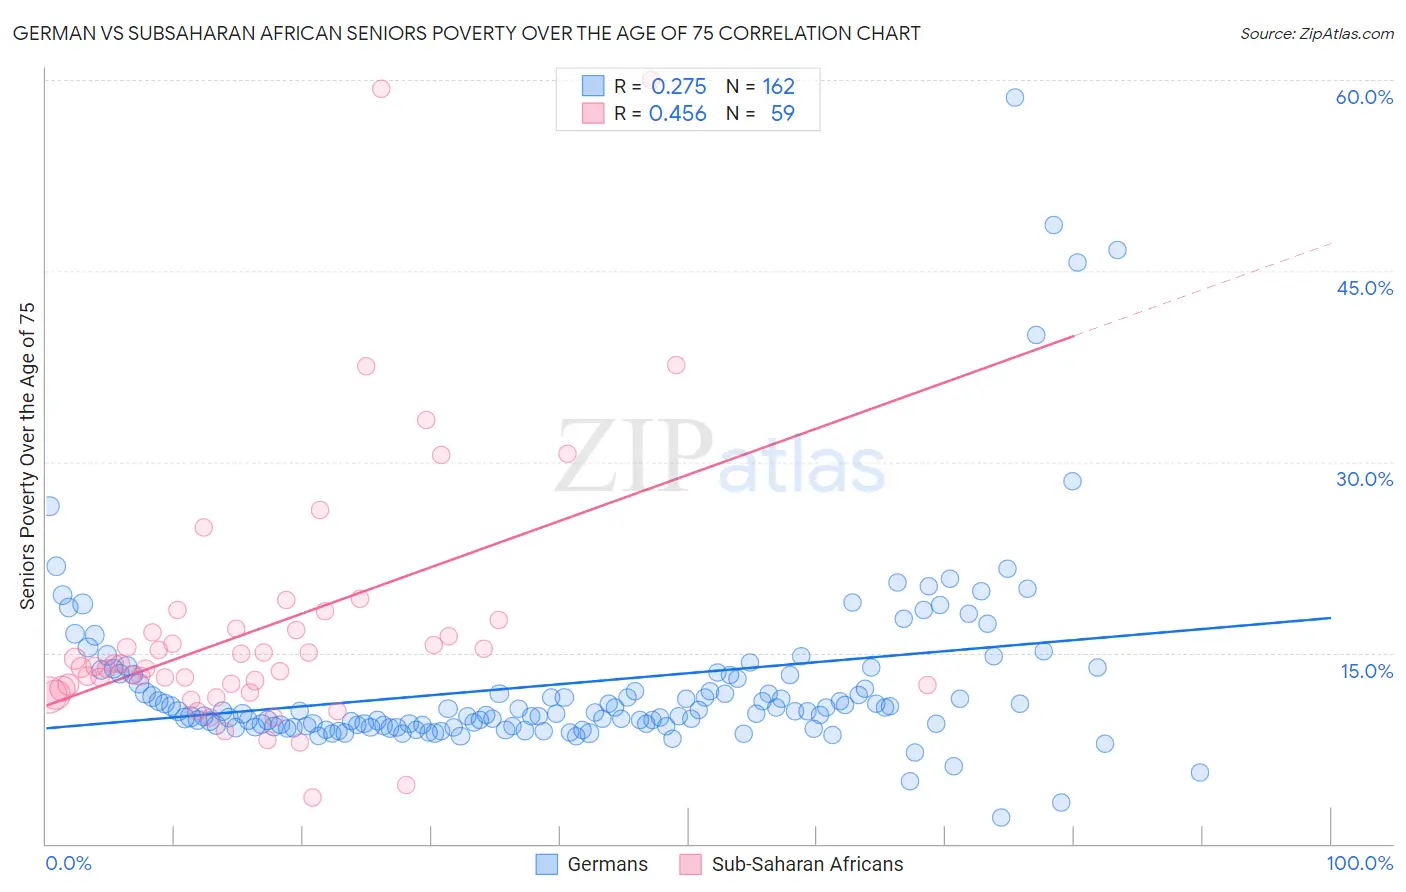 German vs Subsaharan African Seniors Poverty Over the Age of 75